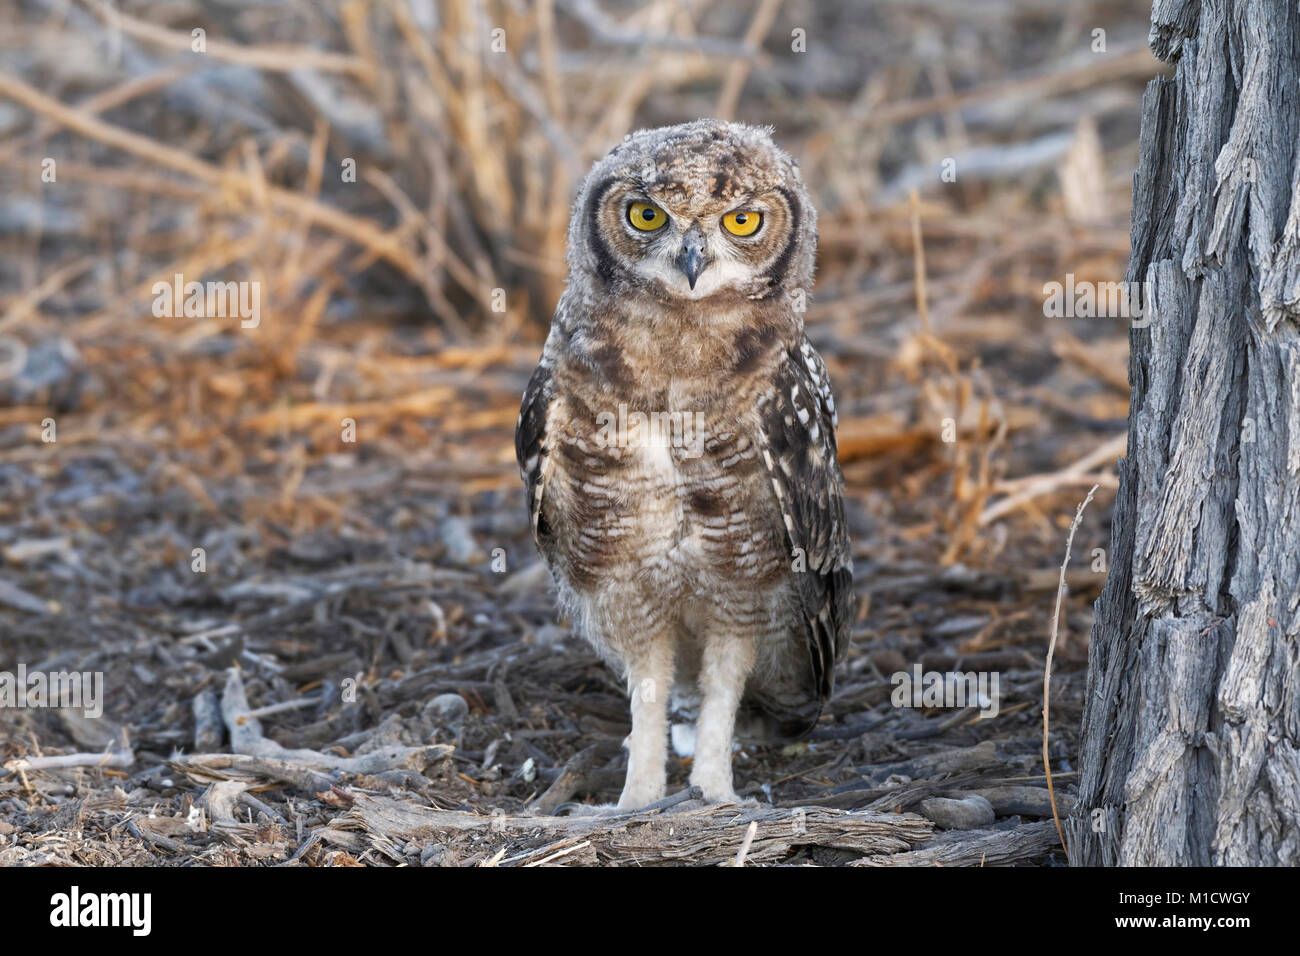 Spotted eagle-owl (Bubo africanus), young bird on the ground looking for prey at dusk, Kgalagadi Transfrontier Park, Northern Cape,South Africa,Africa Stock Photo